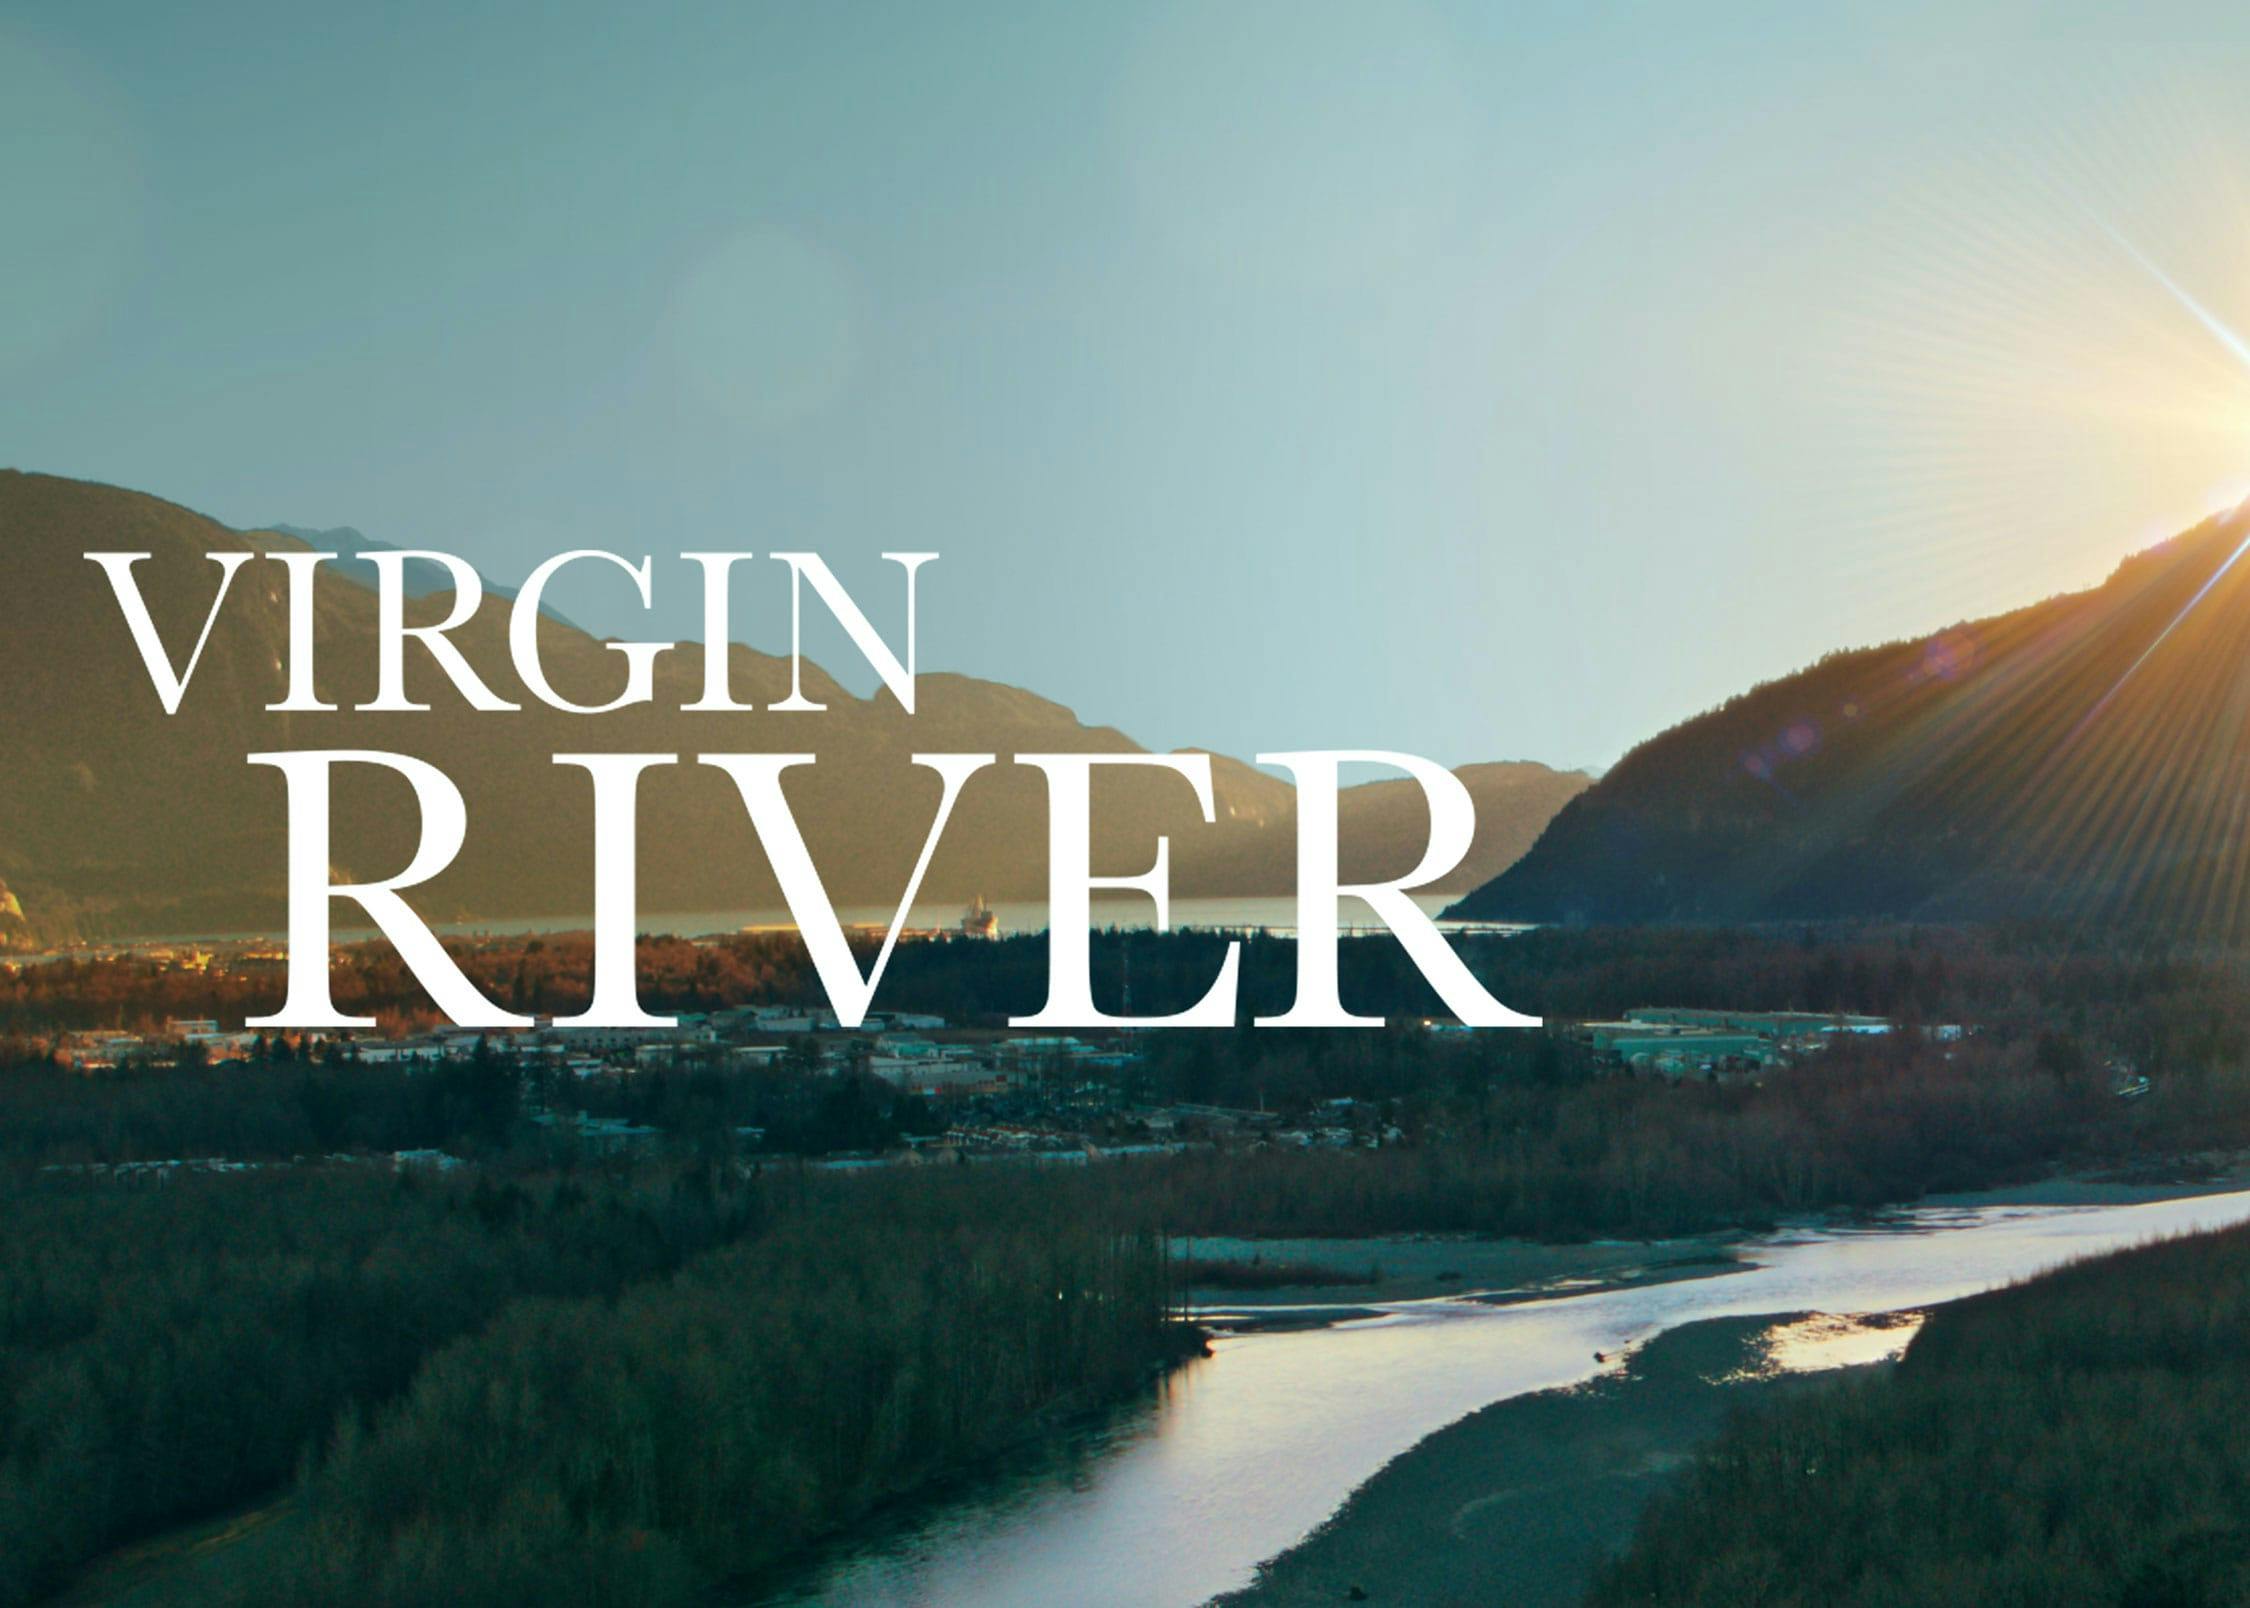 The key art for the show Virgin River. The title is in white font, and the river scene is serene, lit by a golden sun.